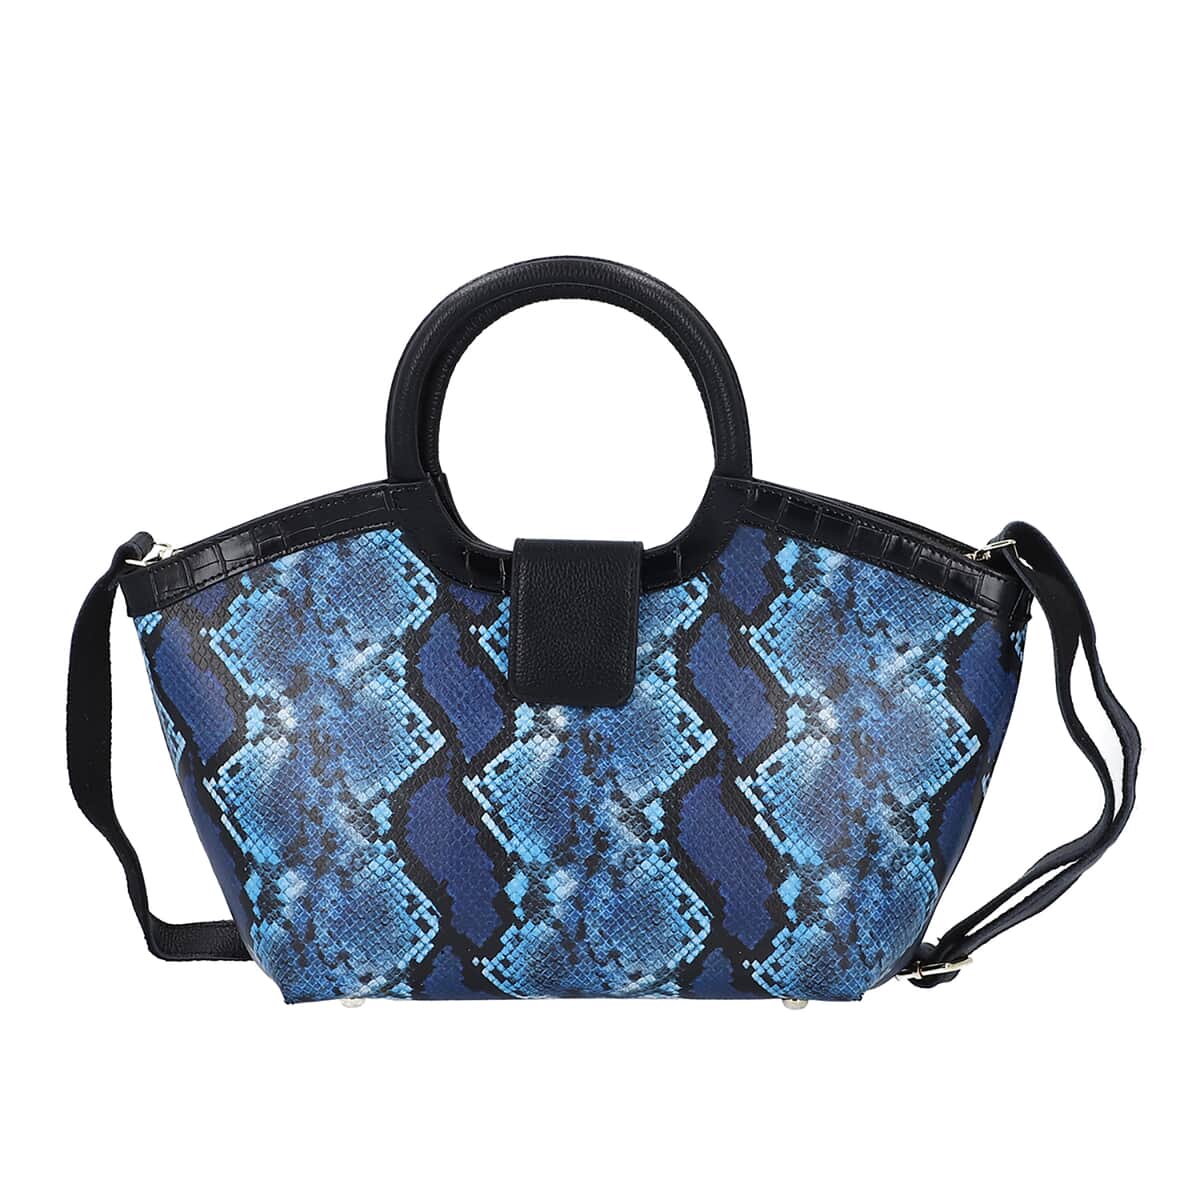 Hong Kong Closed Out Collection Black and Blue Snake Print Pattern Genuine Leather Tote Bag (10.5"x16"x5x8.66") with Handle and Shoulder Straps image number 0